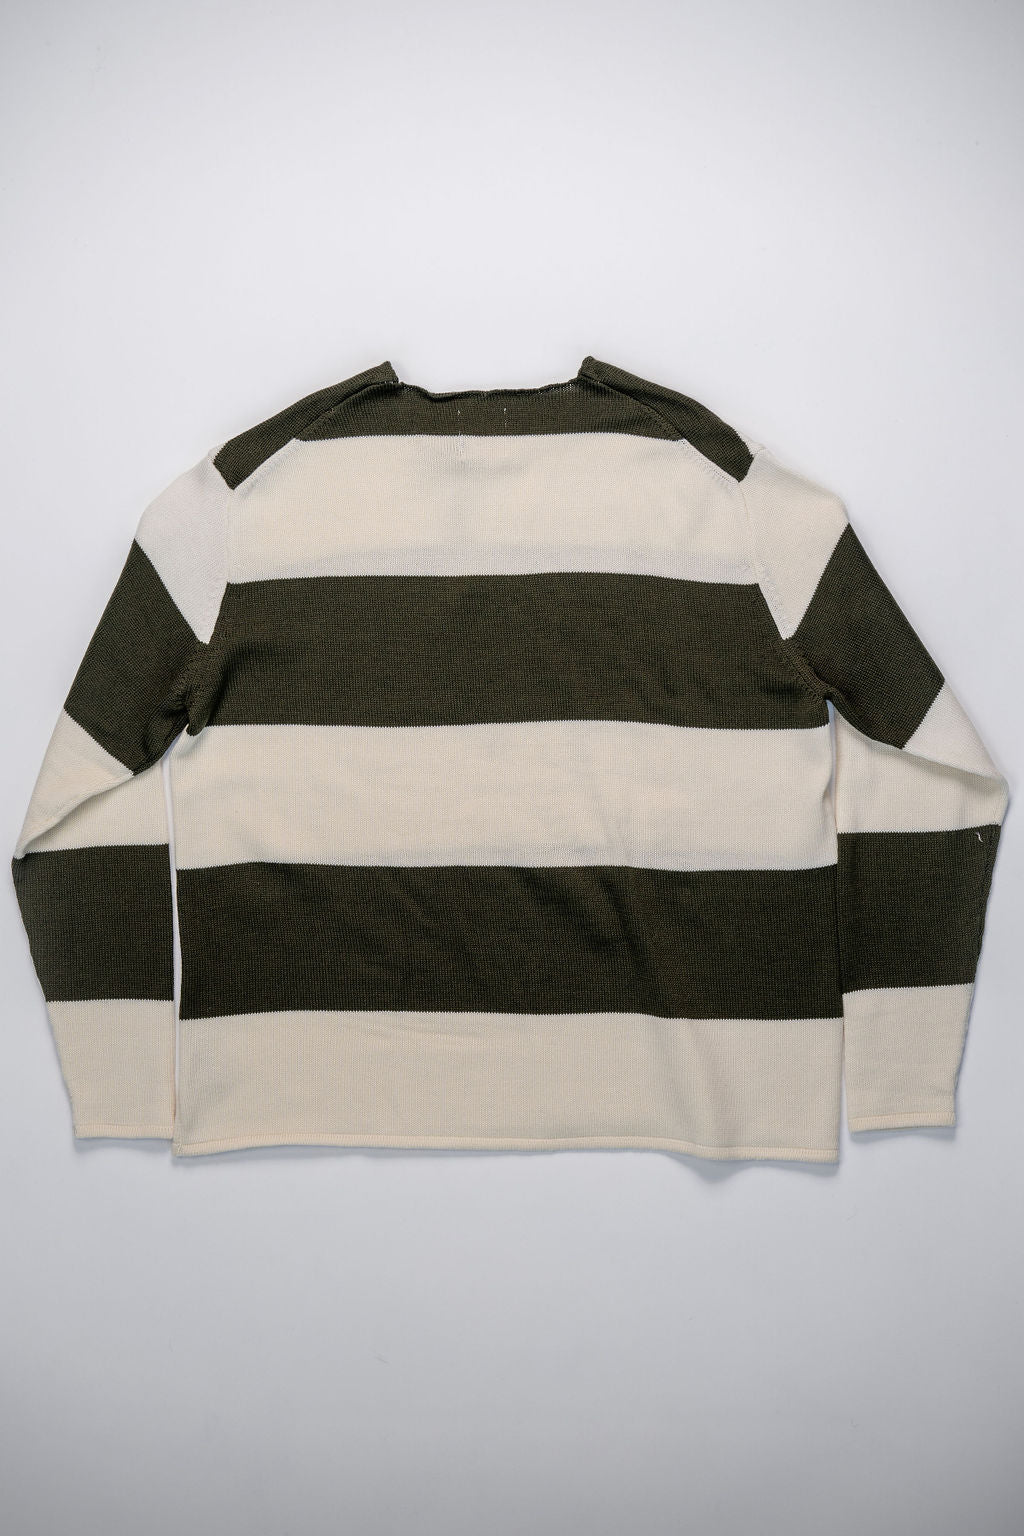 Heimat Textil Rugby Harbor Sweater - Seashell/Military Green